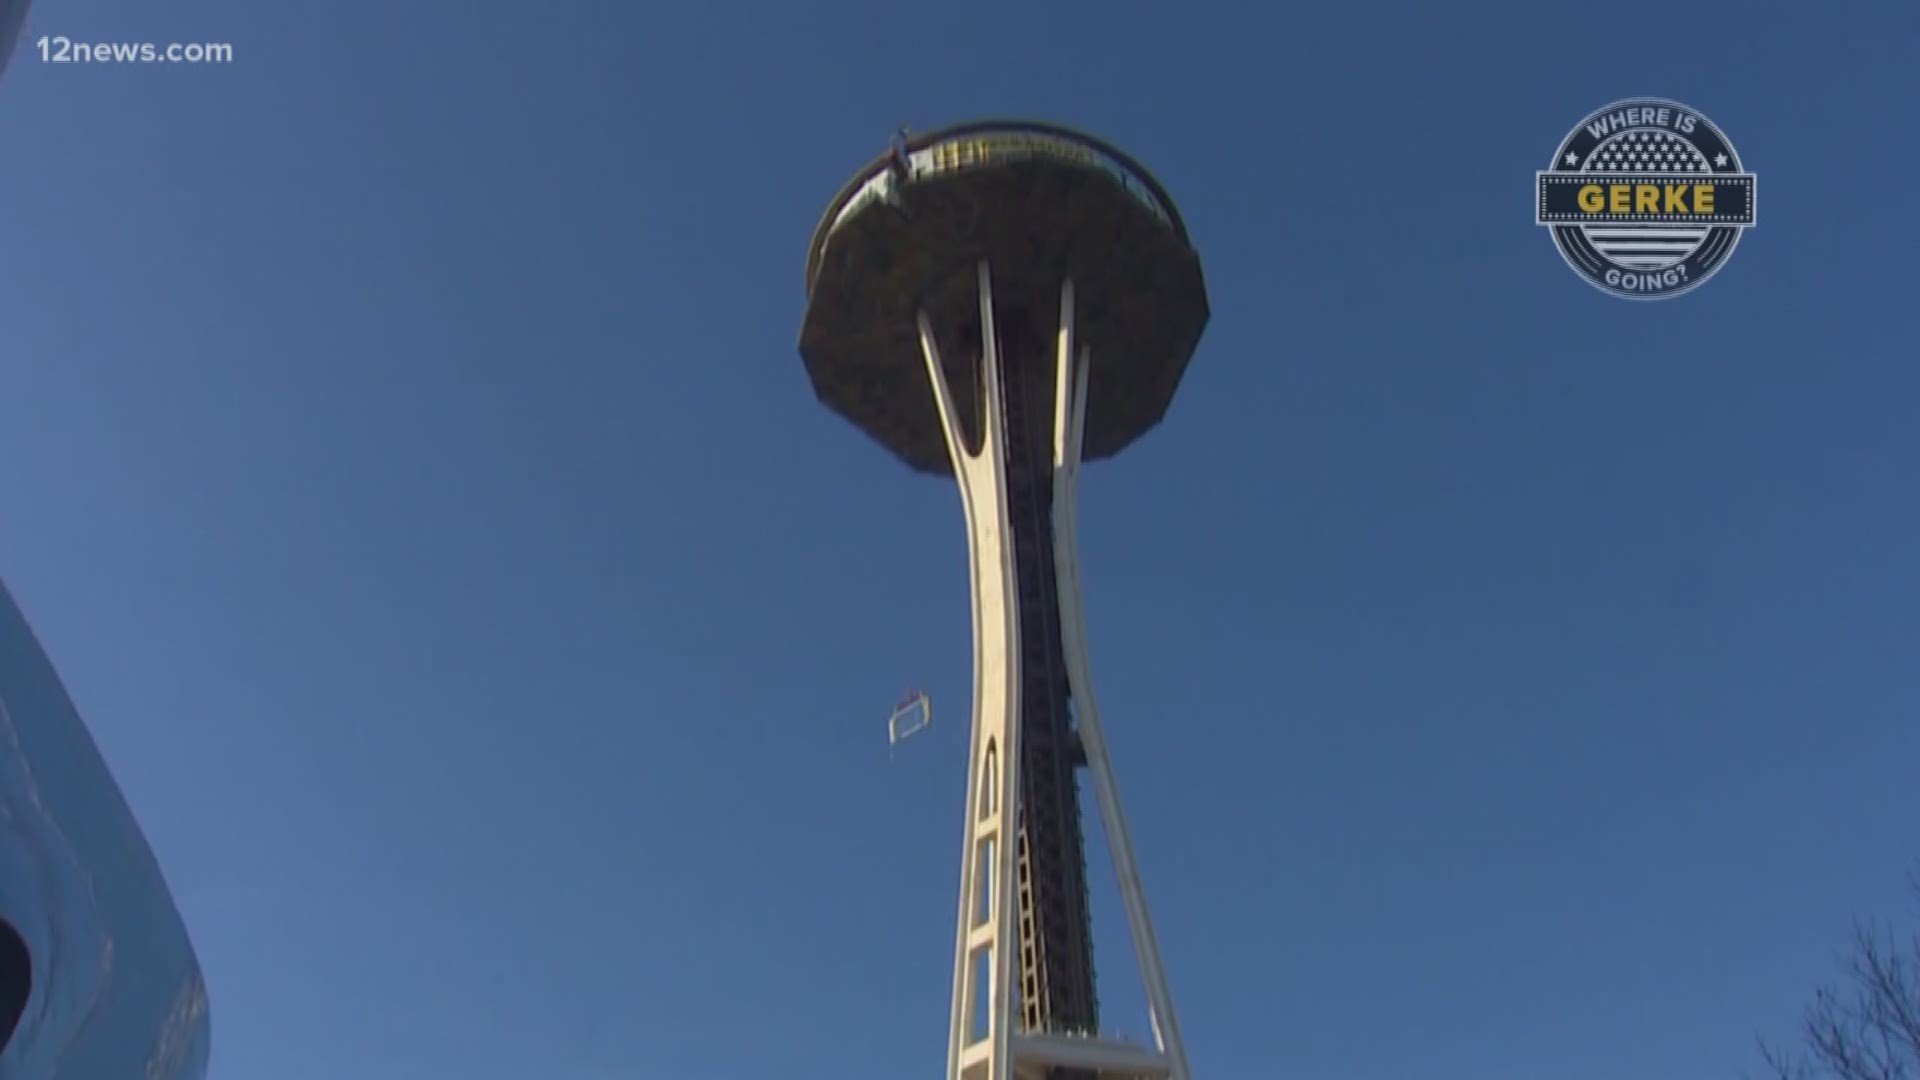 Paul Gerke shows us the renovations going on in the Space Needle in Seattle.